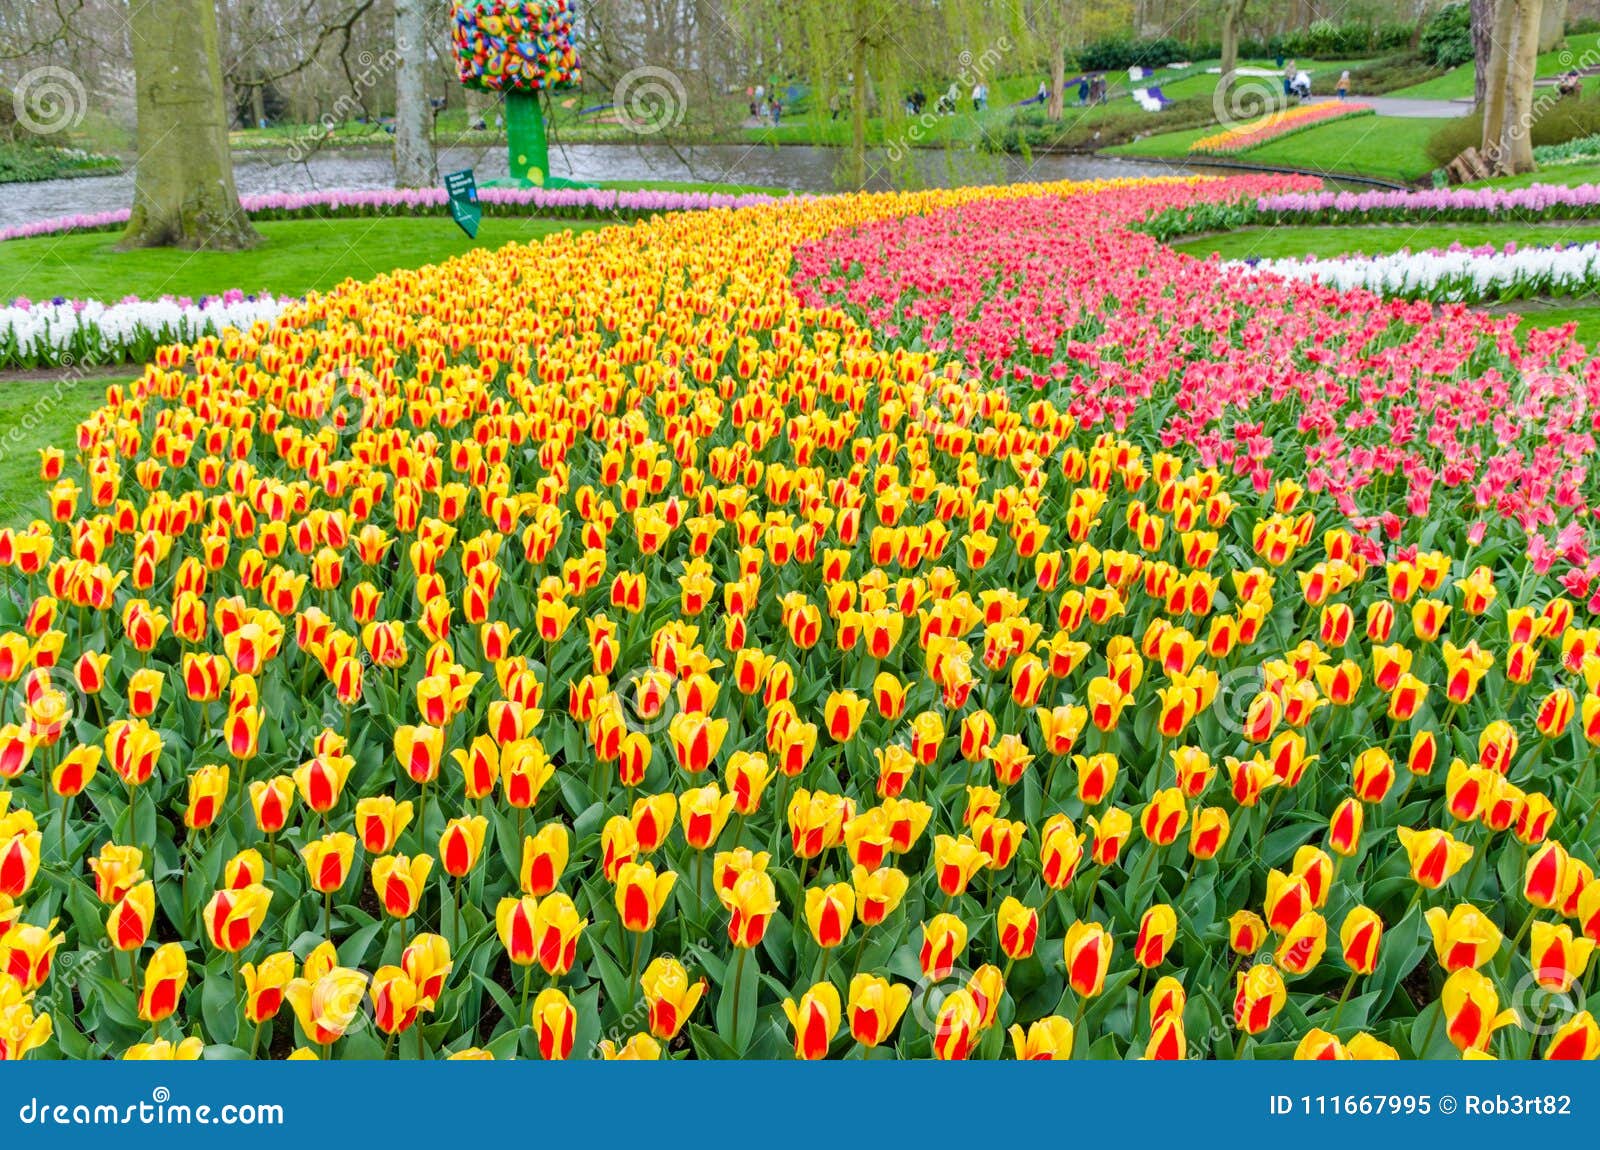 colorful flowers and blossom in dutch spring garden keukenhof which